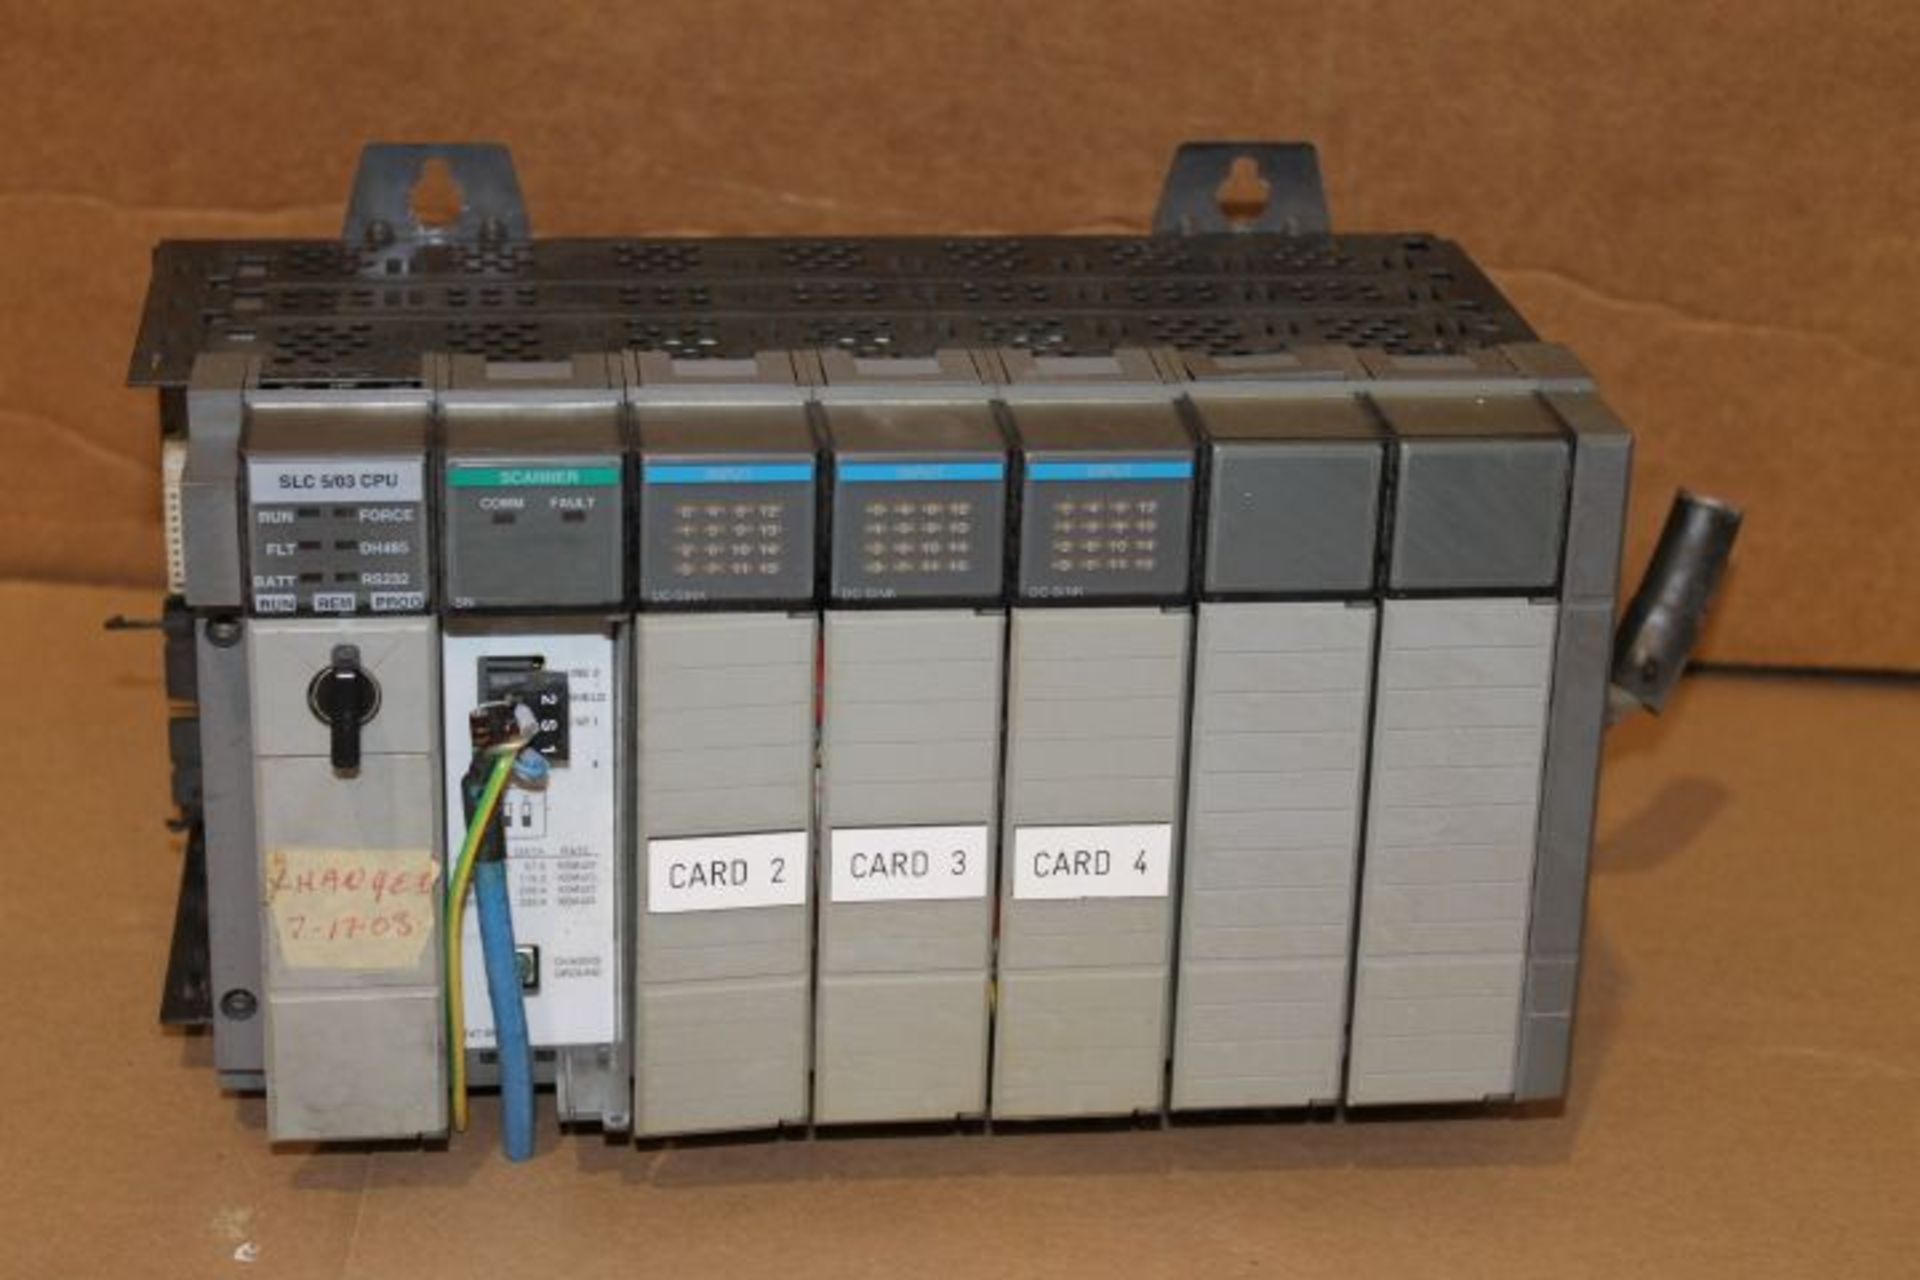 AB SLC 500 7-Slot Rack 1746-A7 with 4 Cards and SLC 5/03 CPU